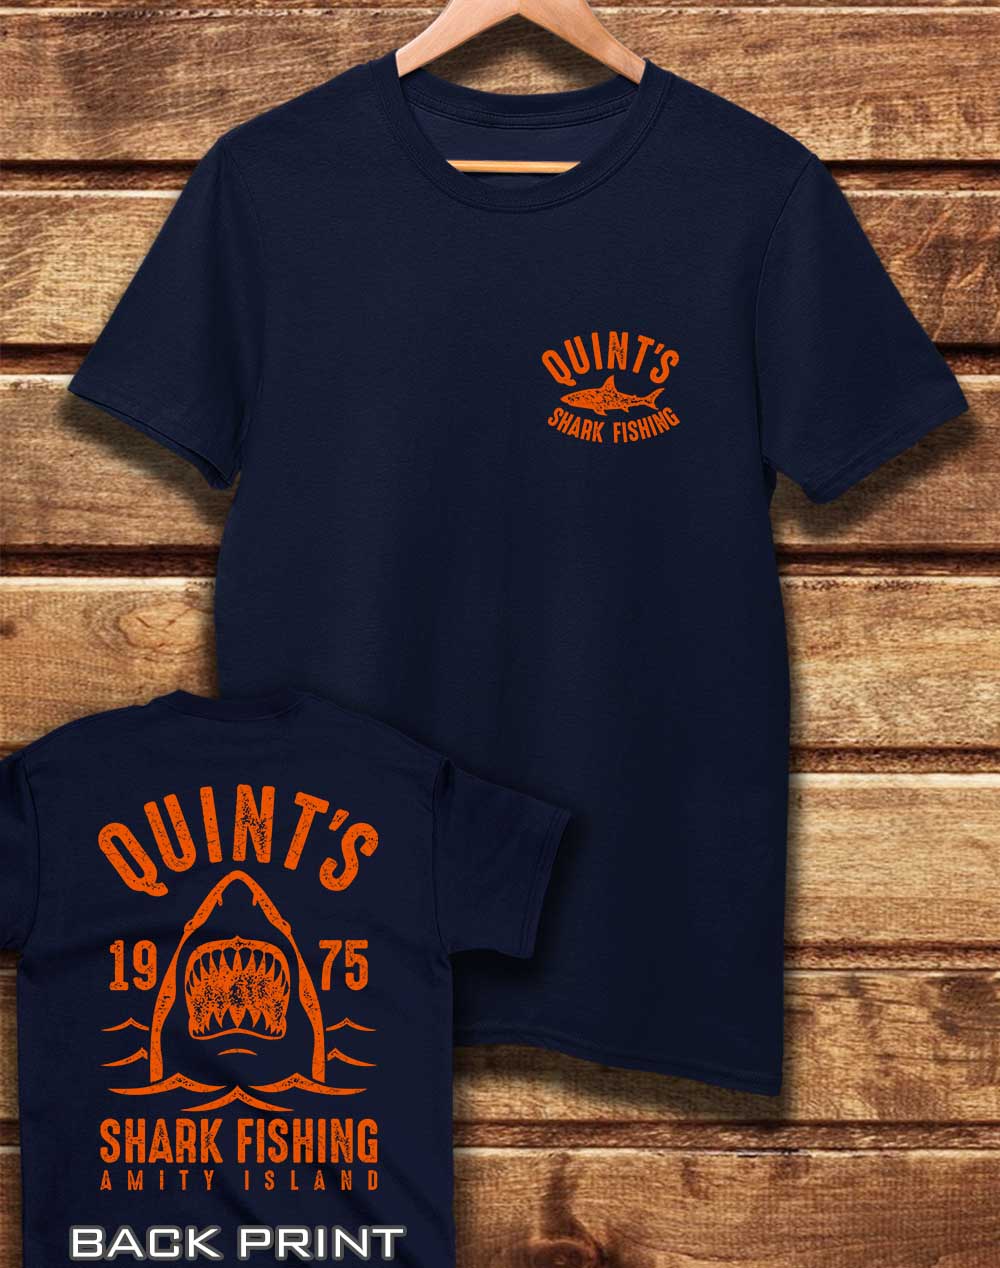 Navy - DELUXE Quint's Shark Fishing with Back Print Organic Cotton T-Shirt